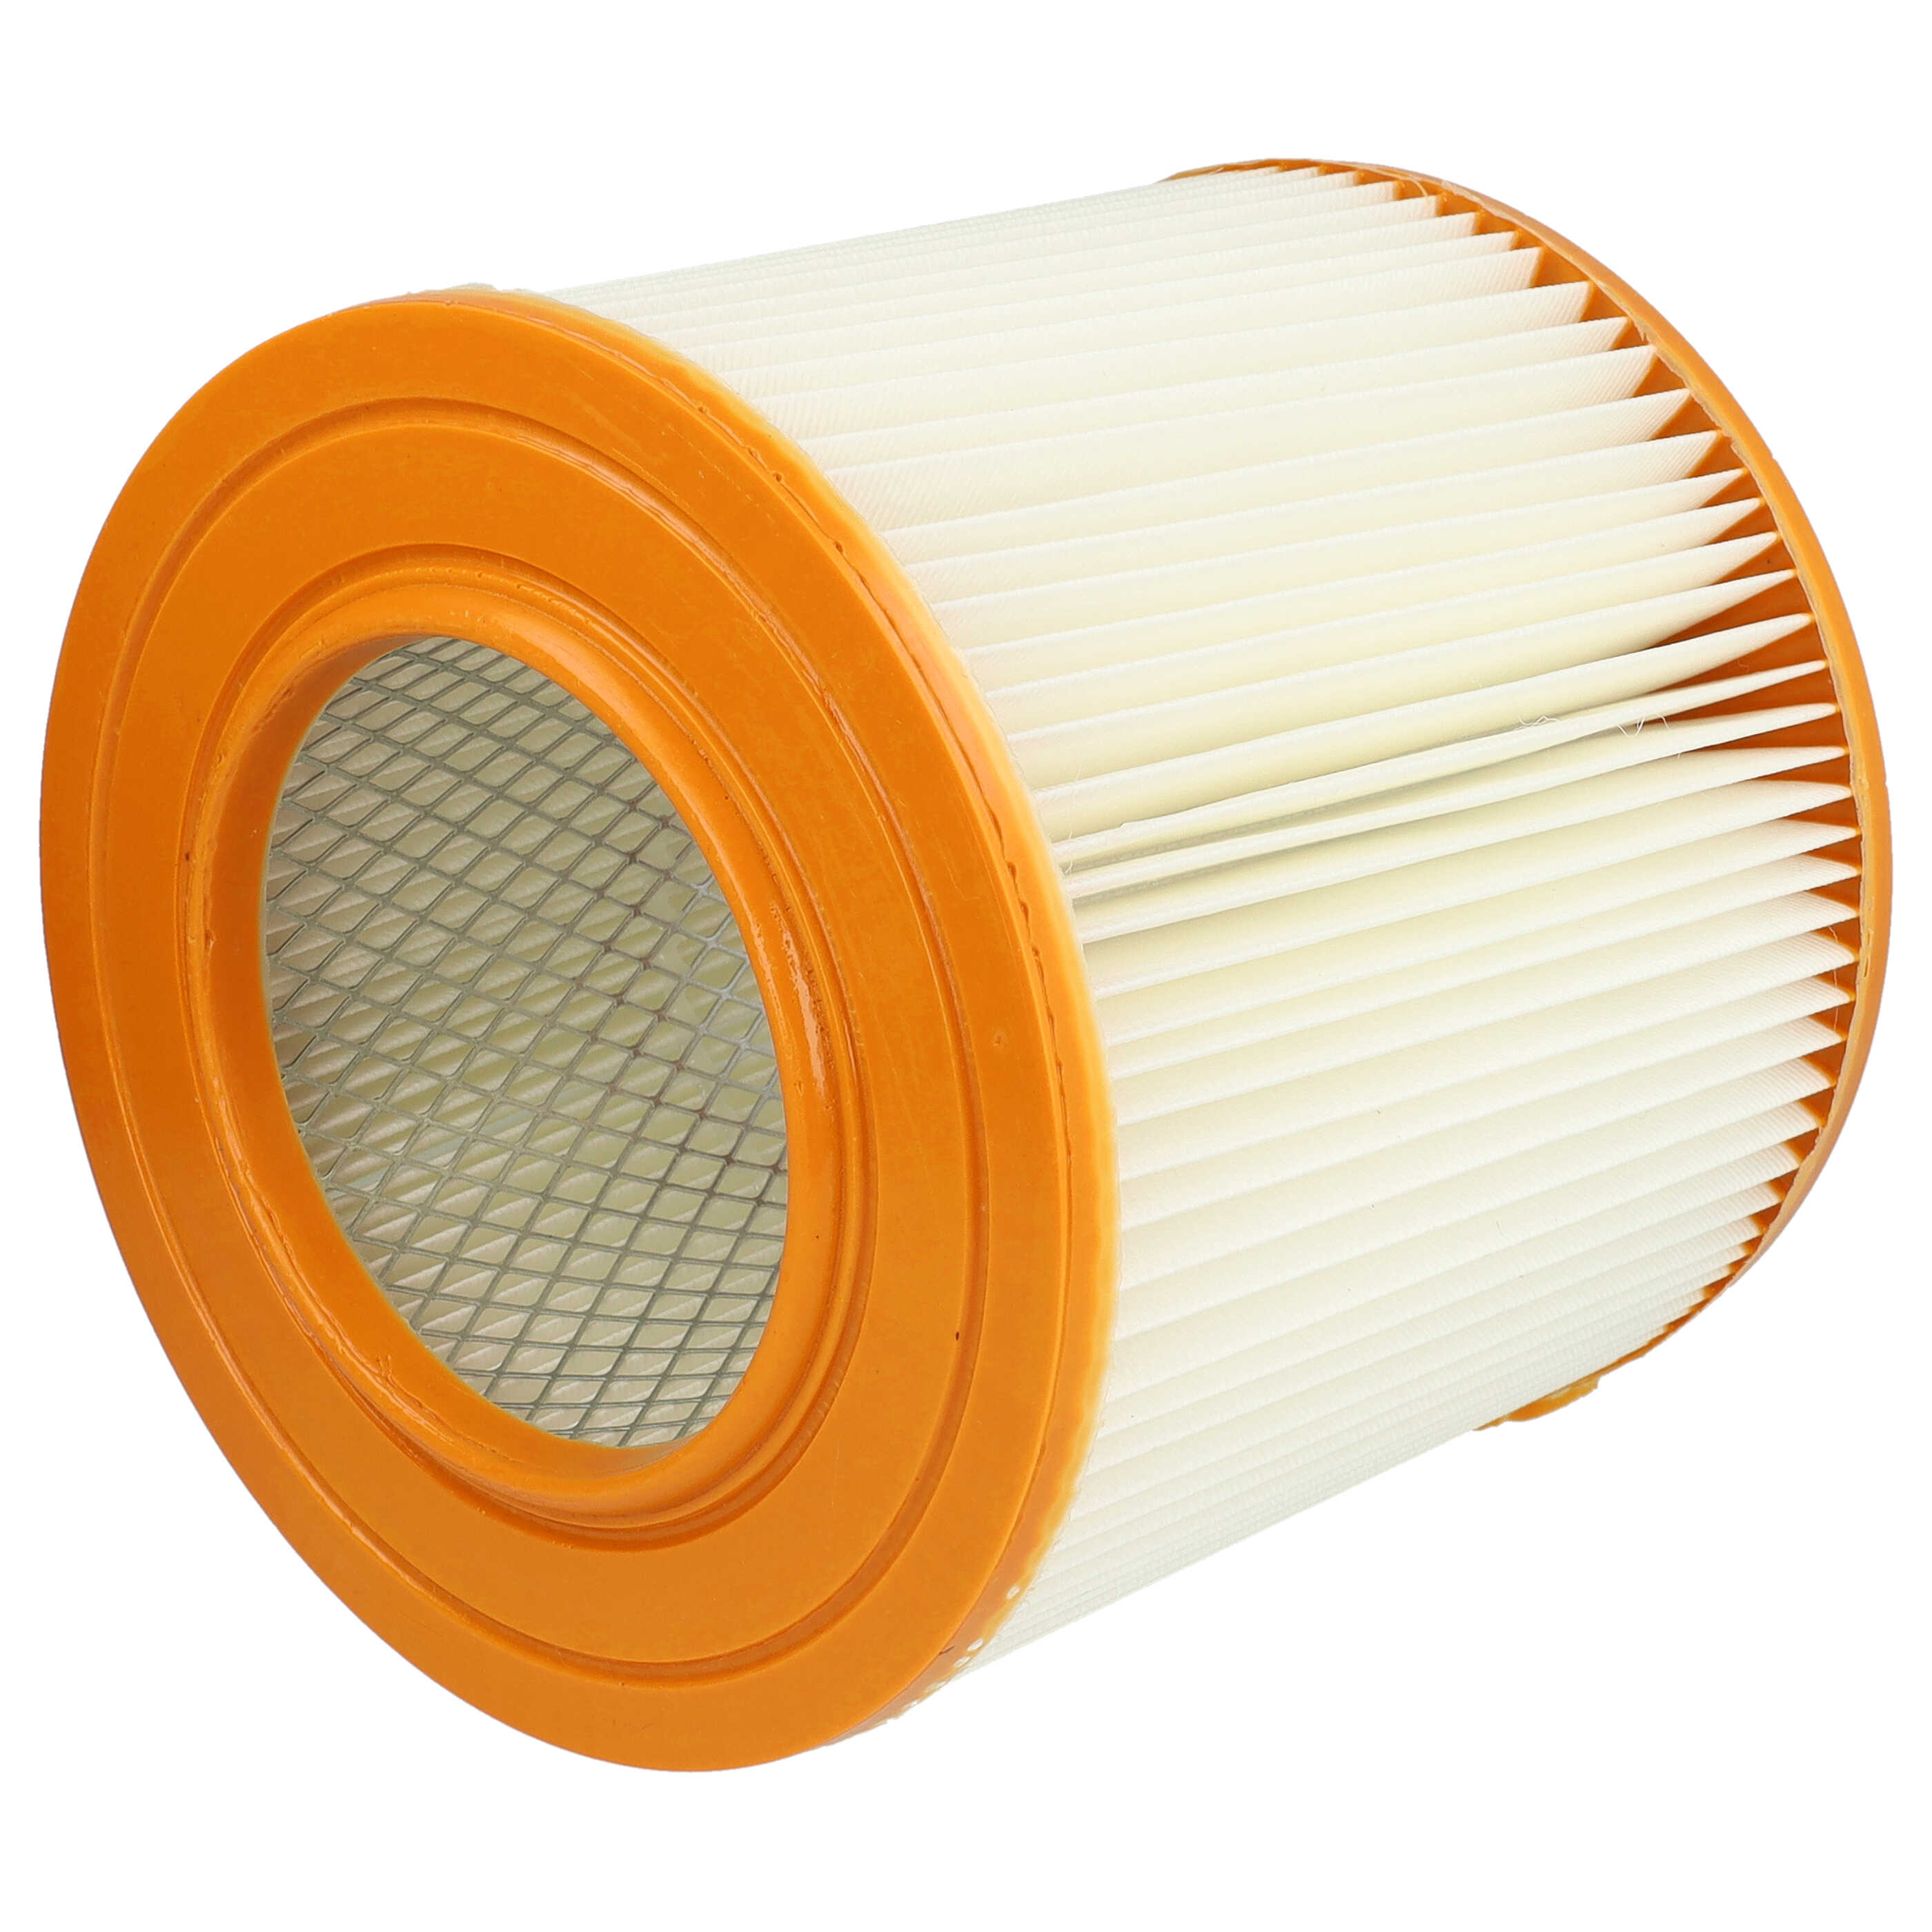 1x pleated filter replaces Allaway 210813, 10819, 2577, 10813 for Allaway Vacuum Cleaner, orange / white